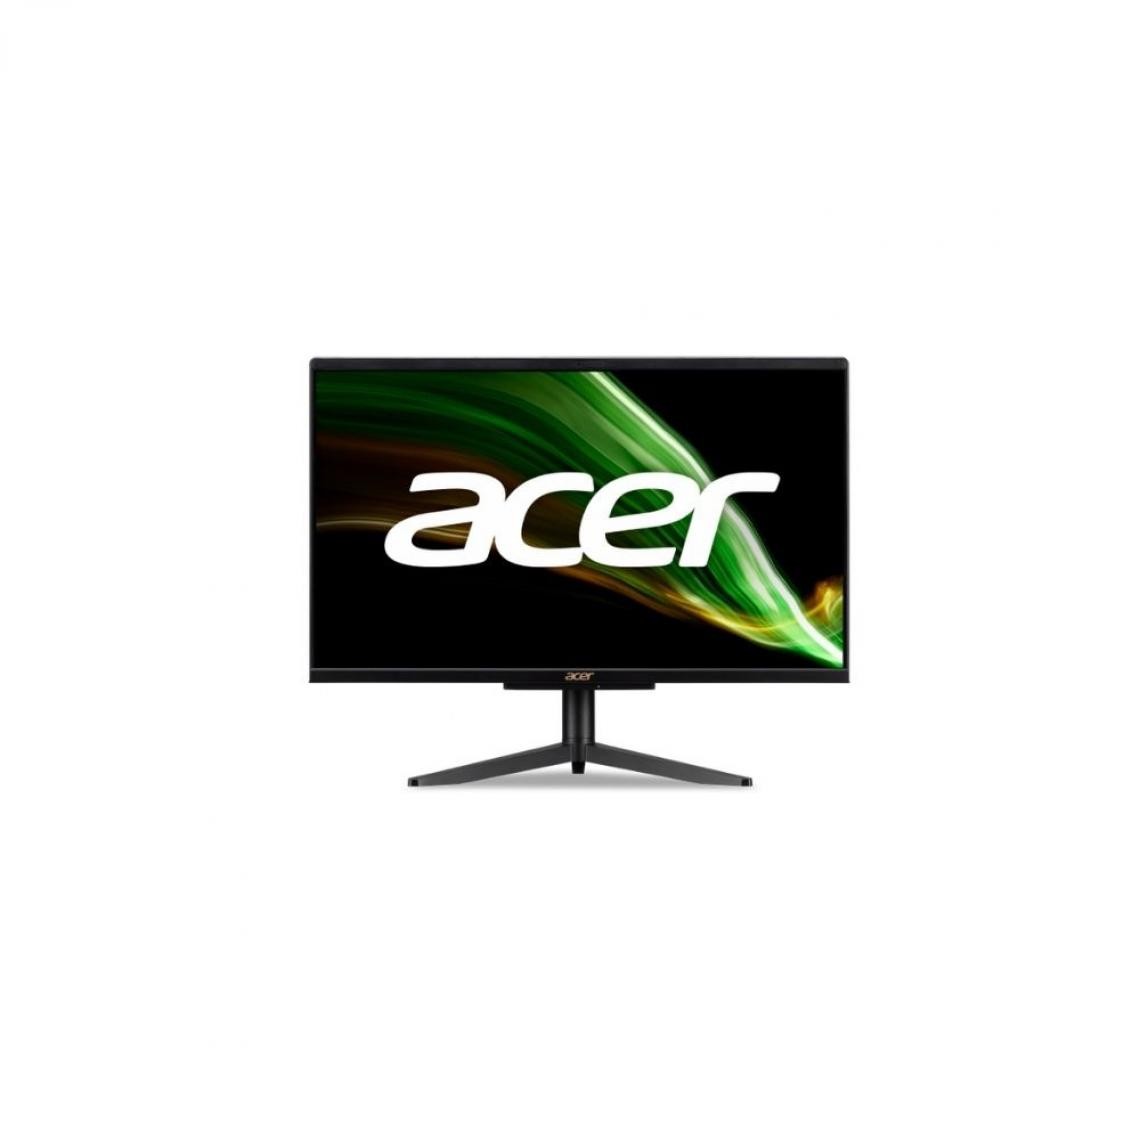 Acer - All in One Acer Aspire C22-1600-003 Noir/or Intel® Pentium® Silver N6005 8Go 1 To 5400 Tpm Intel UHD Graphics Dalle 21,5'' Full HD 16:9 200nits WIN11 - PC Fixe